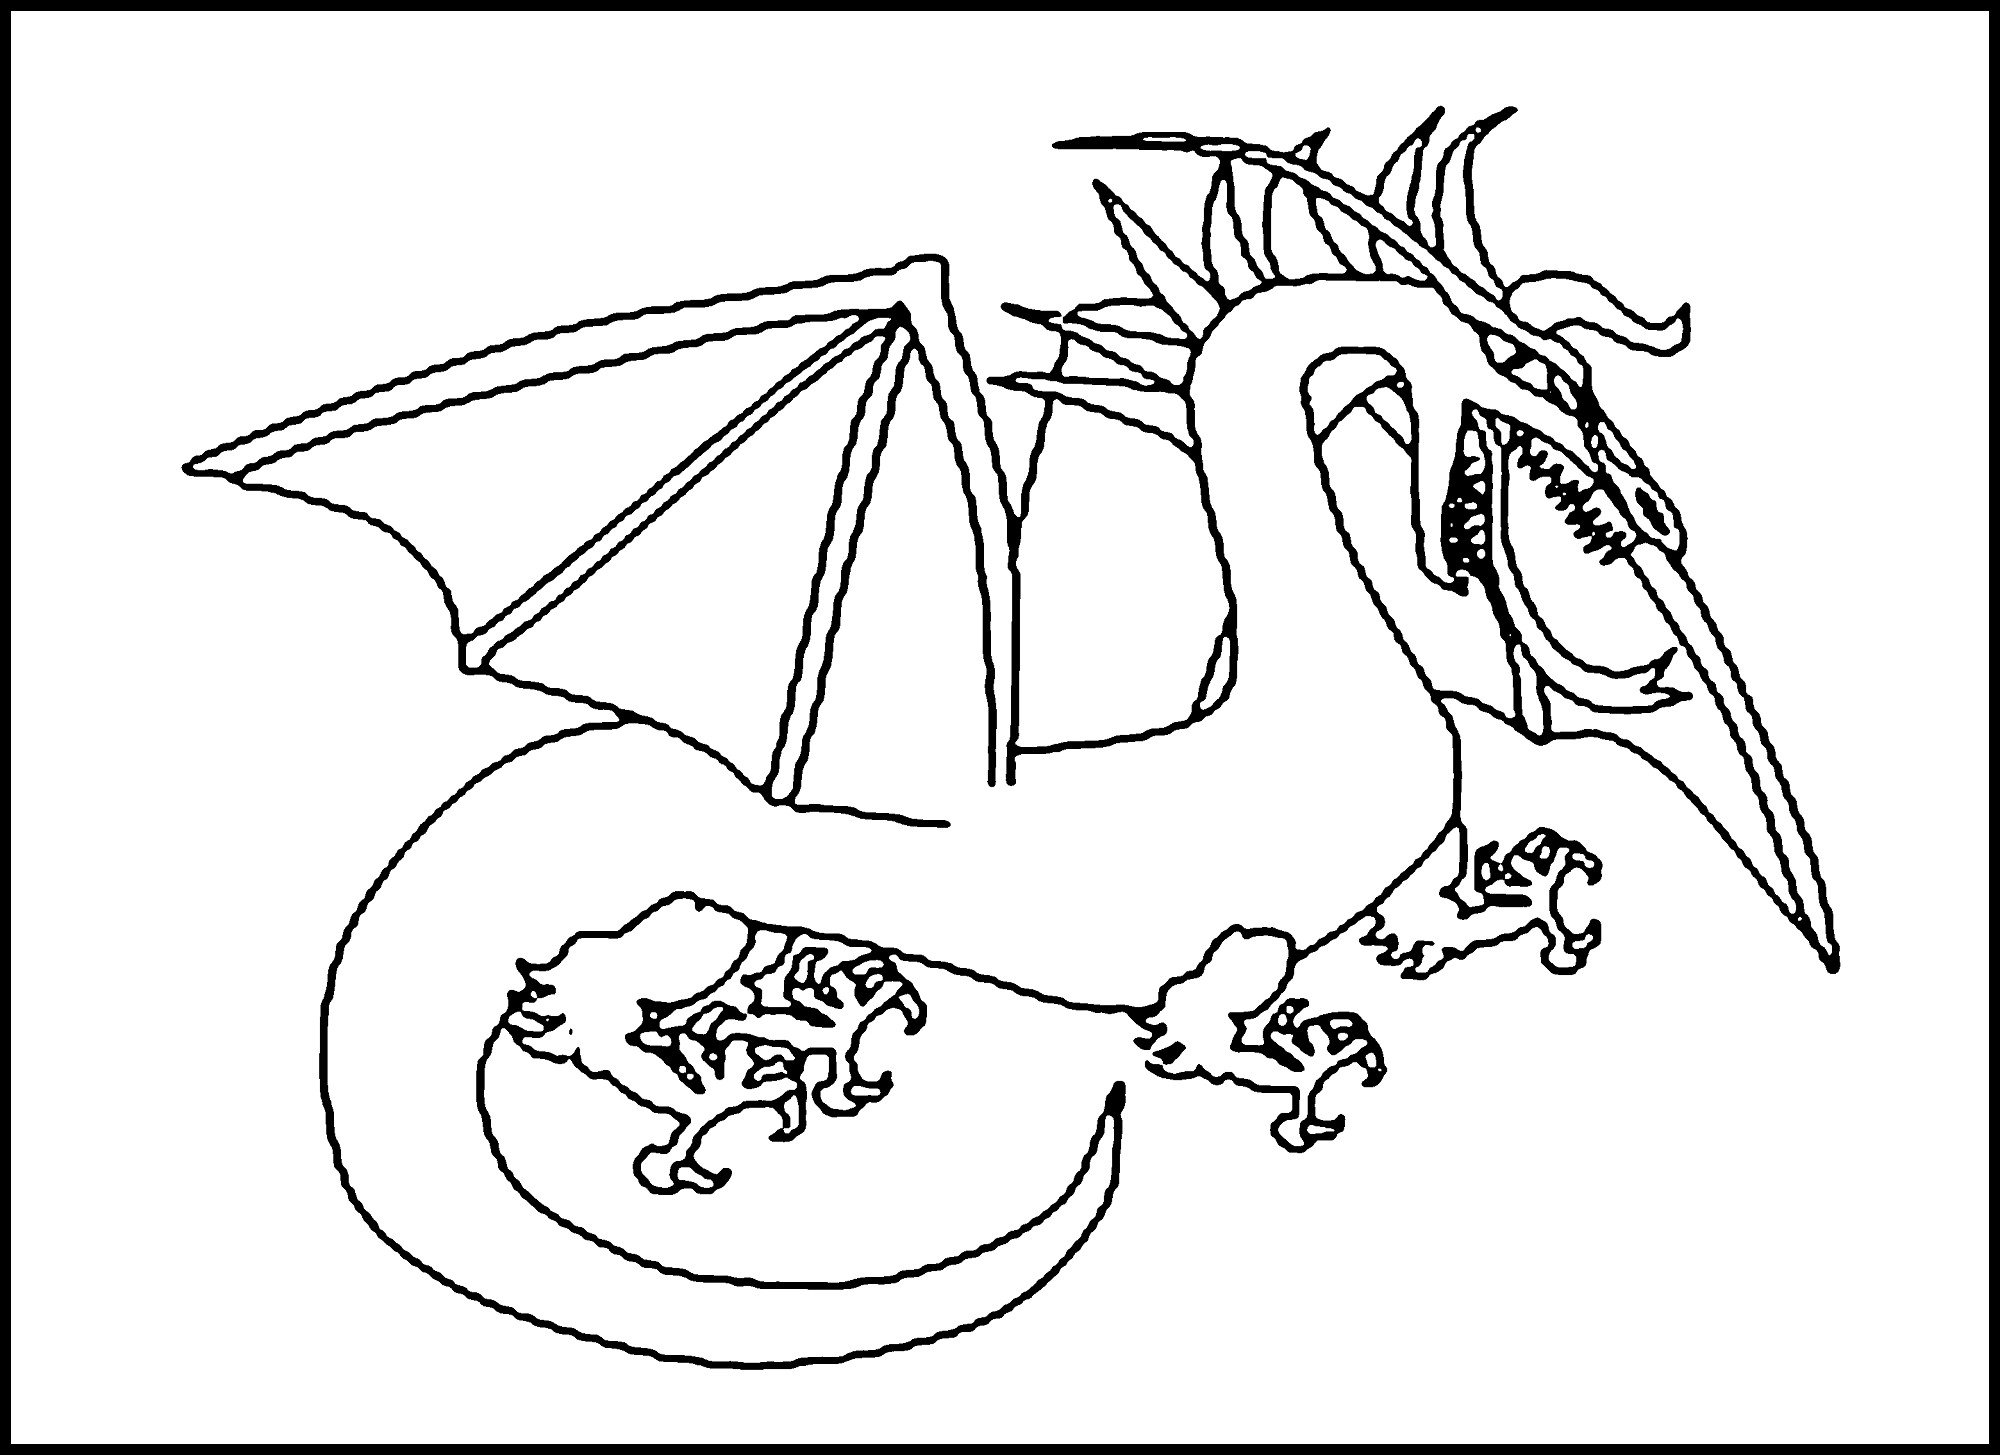 Coloring Pages For Kids Dragon
 Dragon Coloring Pages Printable